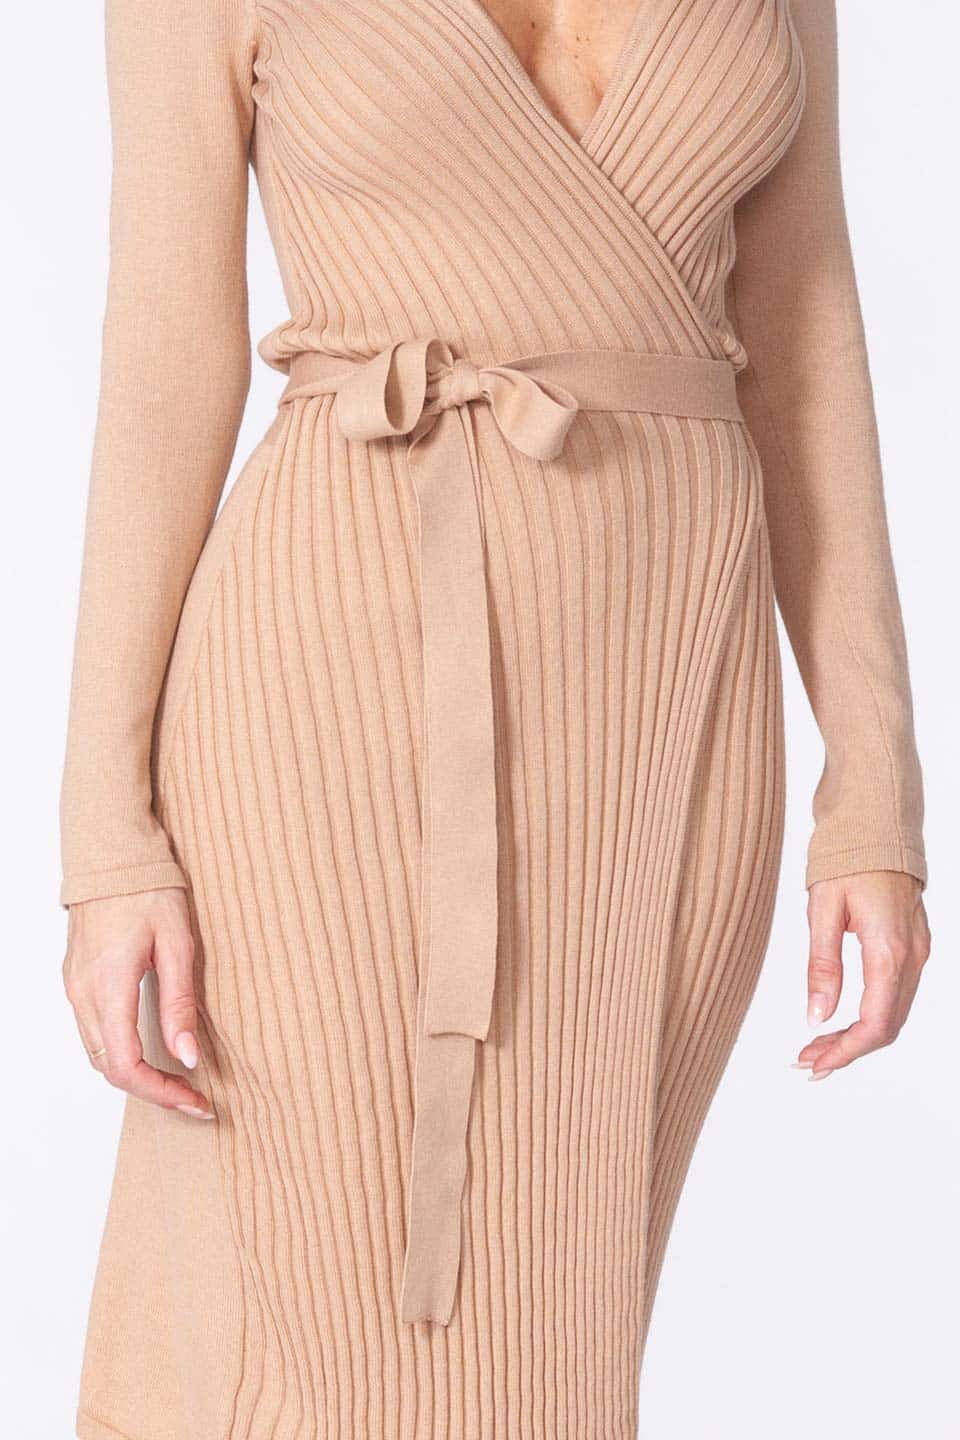 Thumbnail for Product gallery 5, Fashion designer cashmere midi dress fabric details